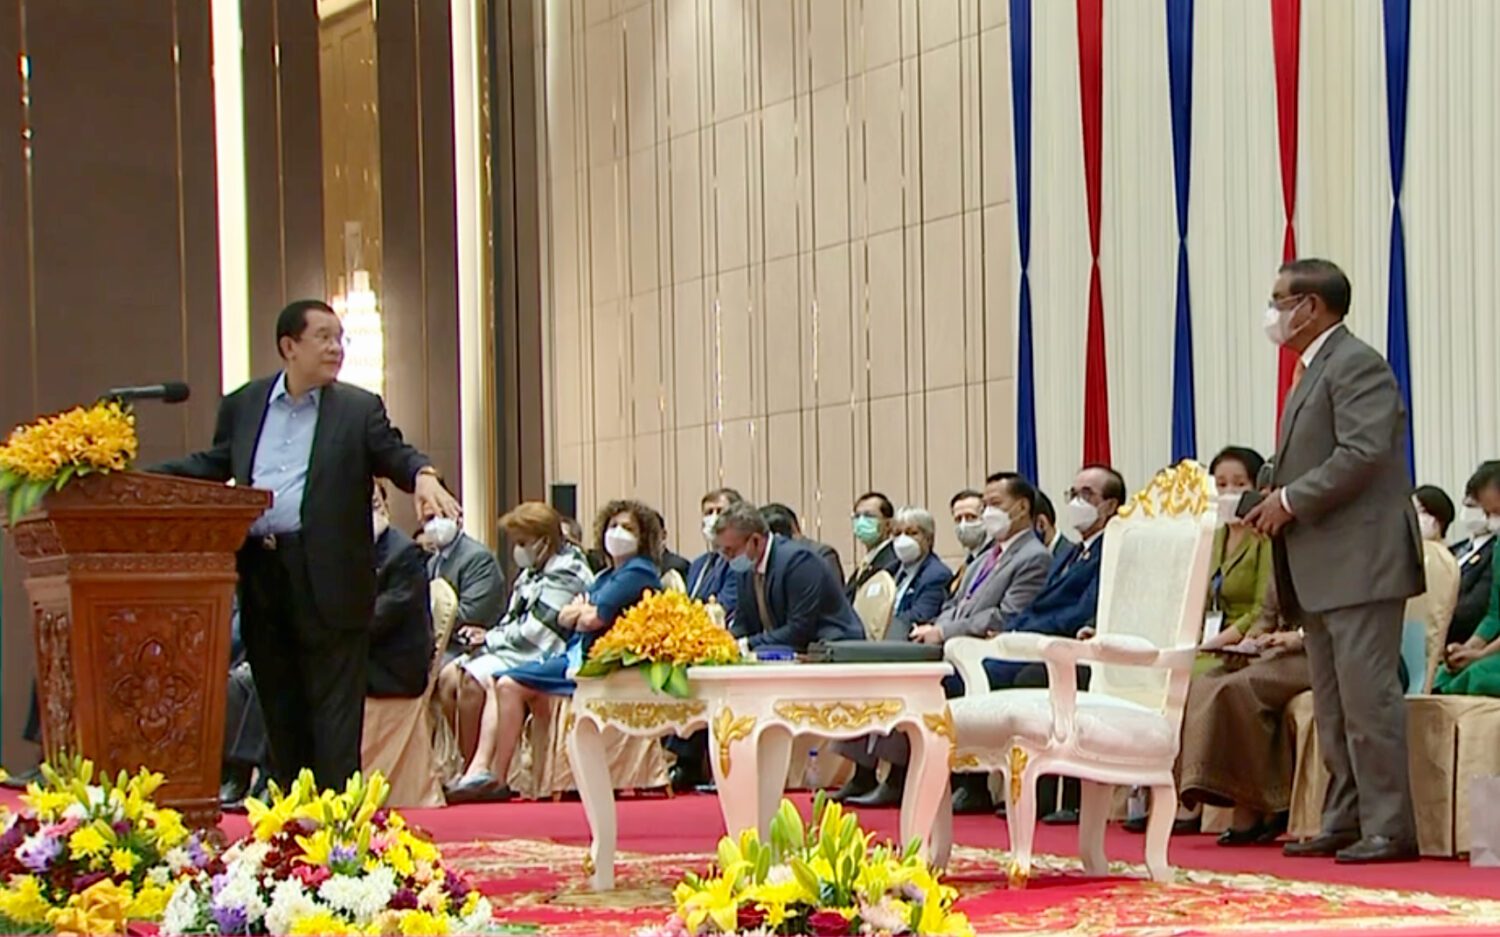 Hun Sen questioning Sar Kheng about scam compound workers at a anti-trafficking event in Phnom Penh on September 29, 2020. (Hun Sen's Facebook page)